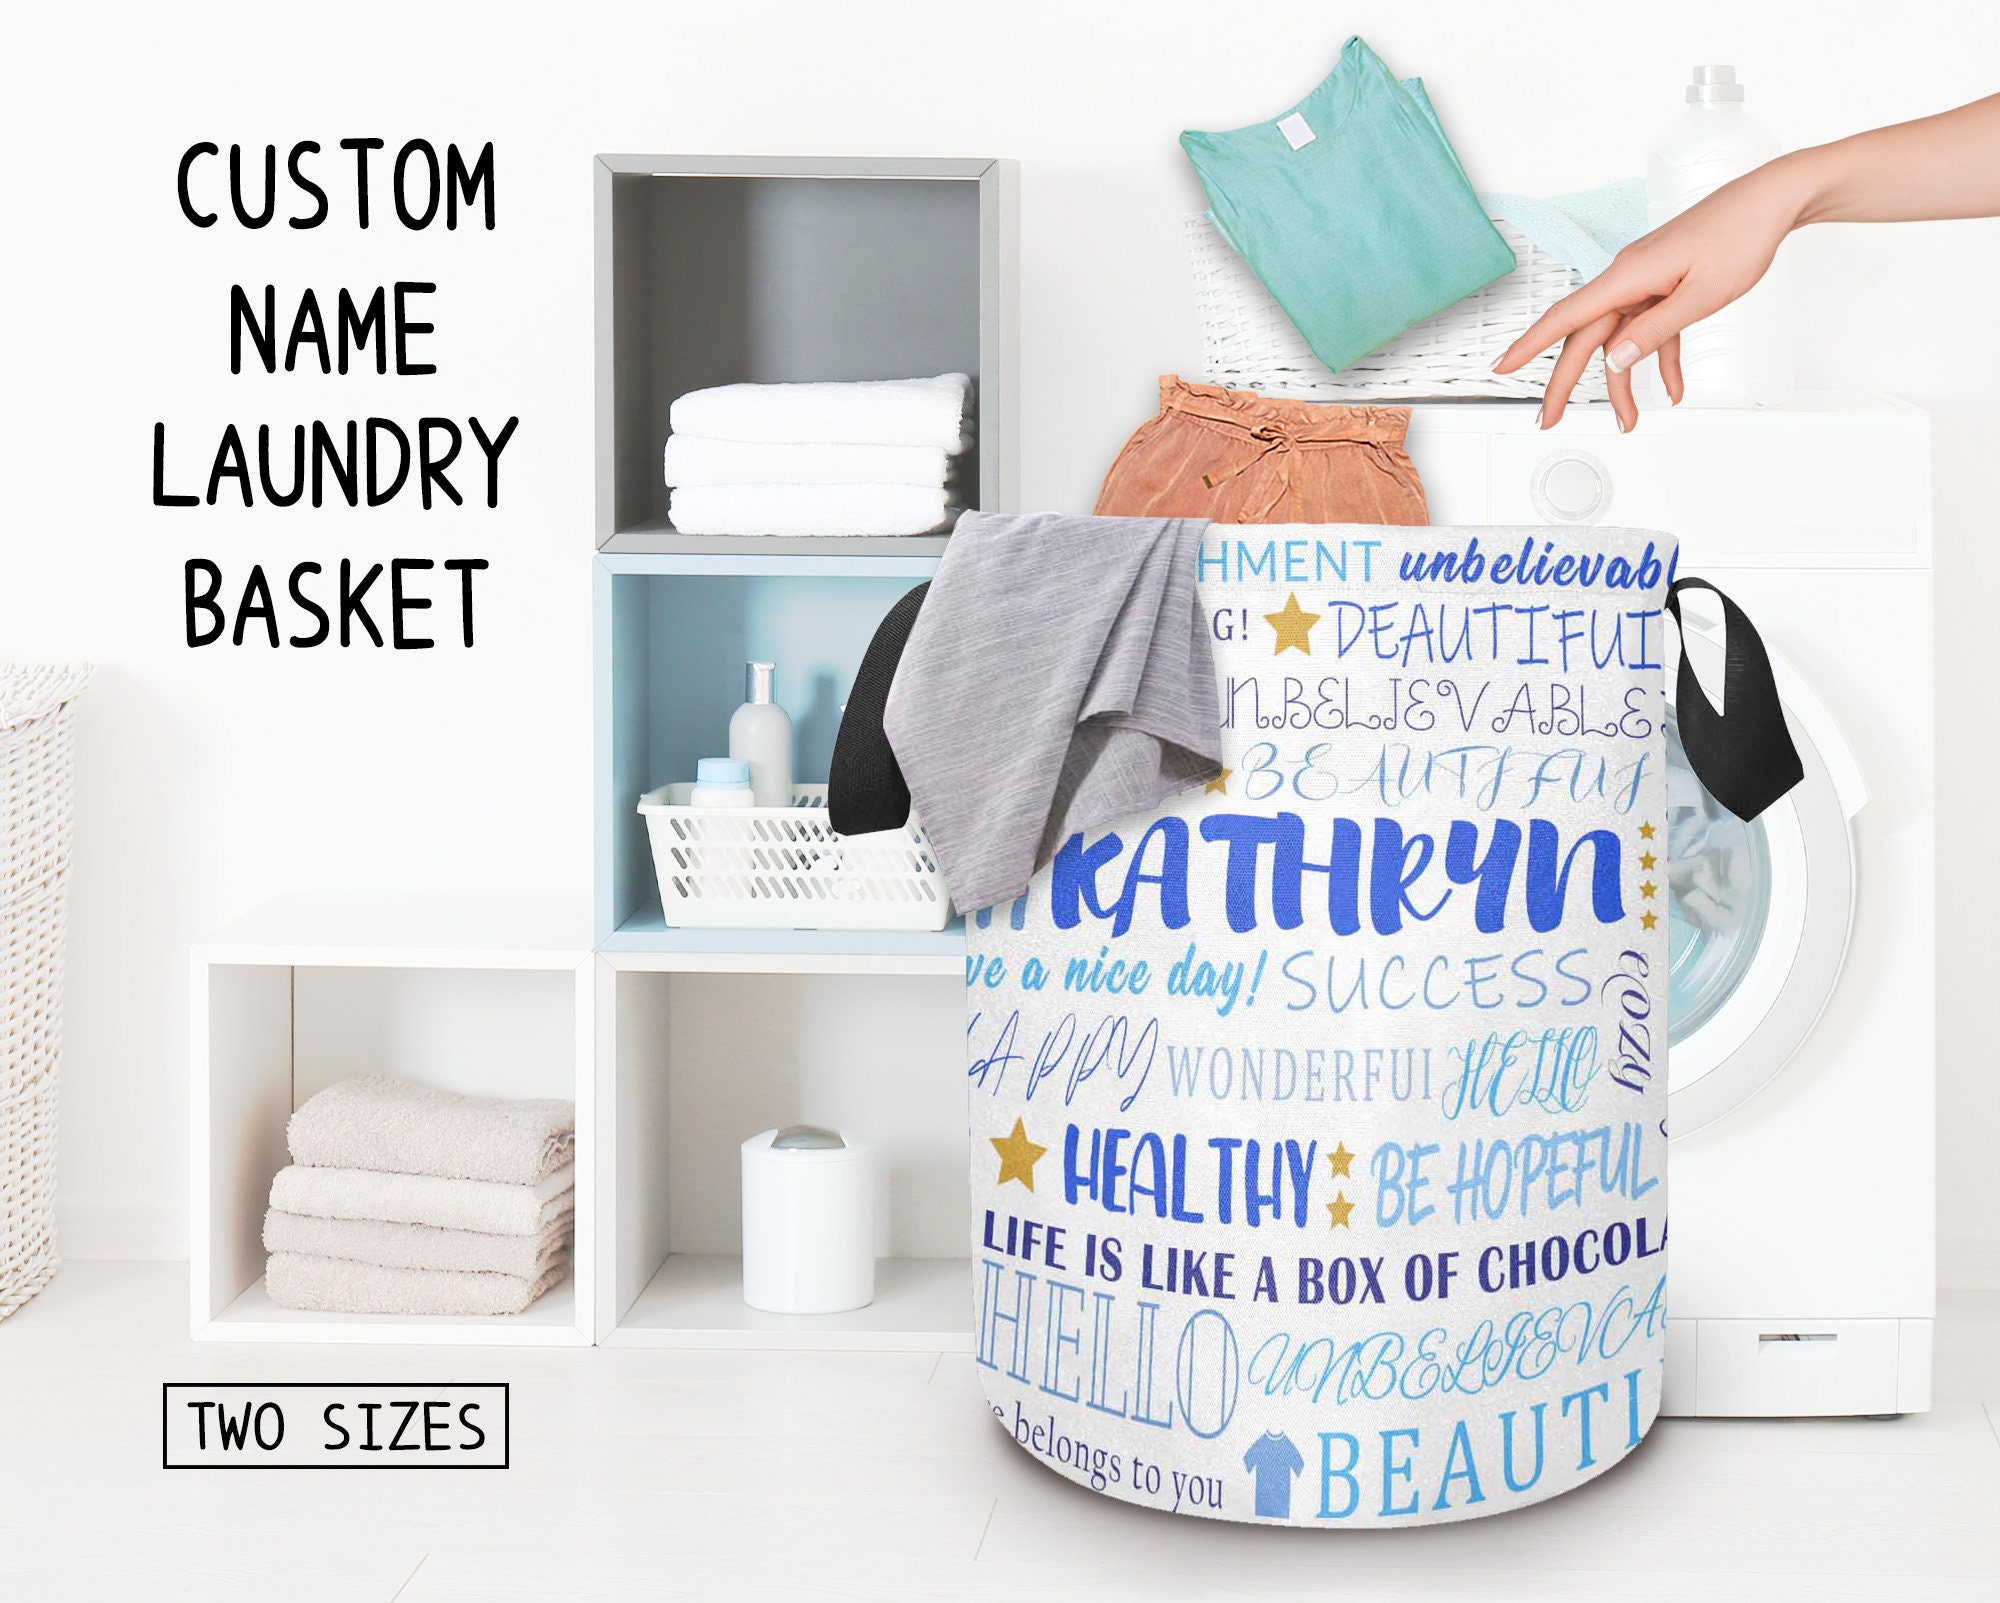 Crystals Large Collapsible Fold Able Laundry Basket Pop Up Clothing Washing  Storage For Bedrooms Lau…See more Crystals Large Collapsible Fold Able